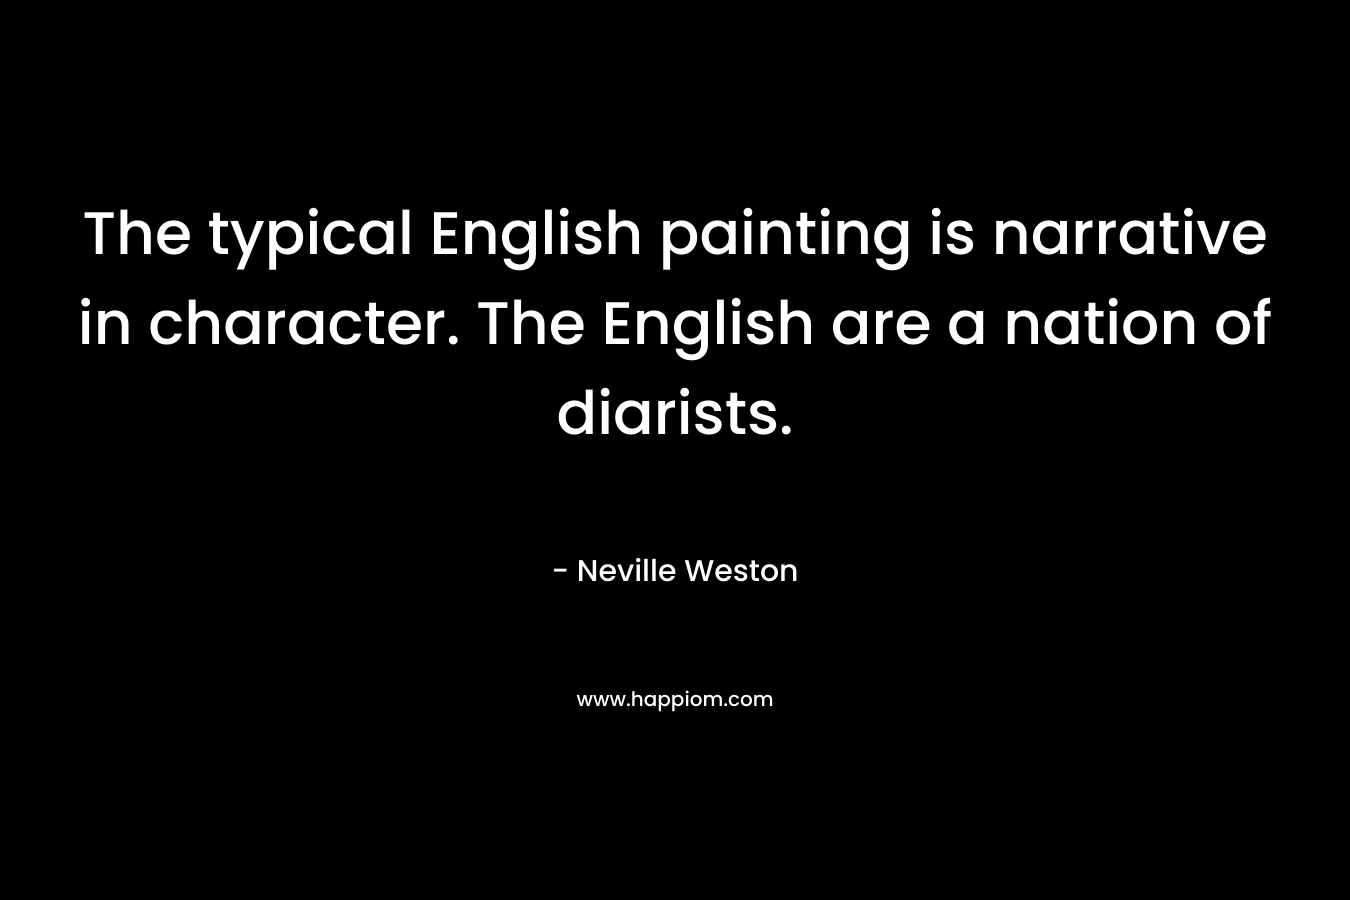 The typical English painting is narrative in character. The English are a nation of diarists.